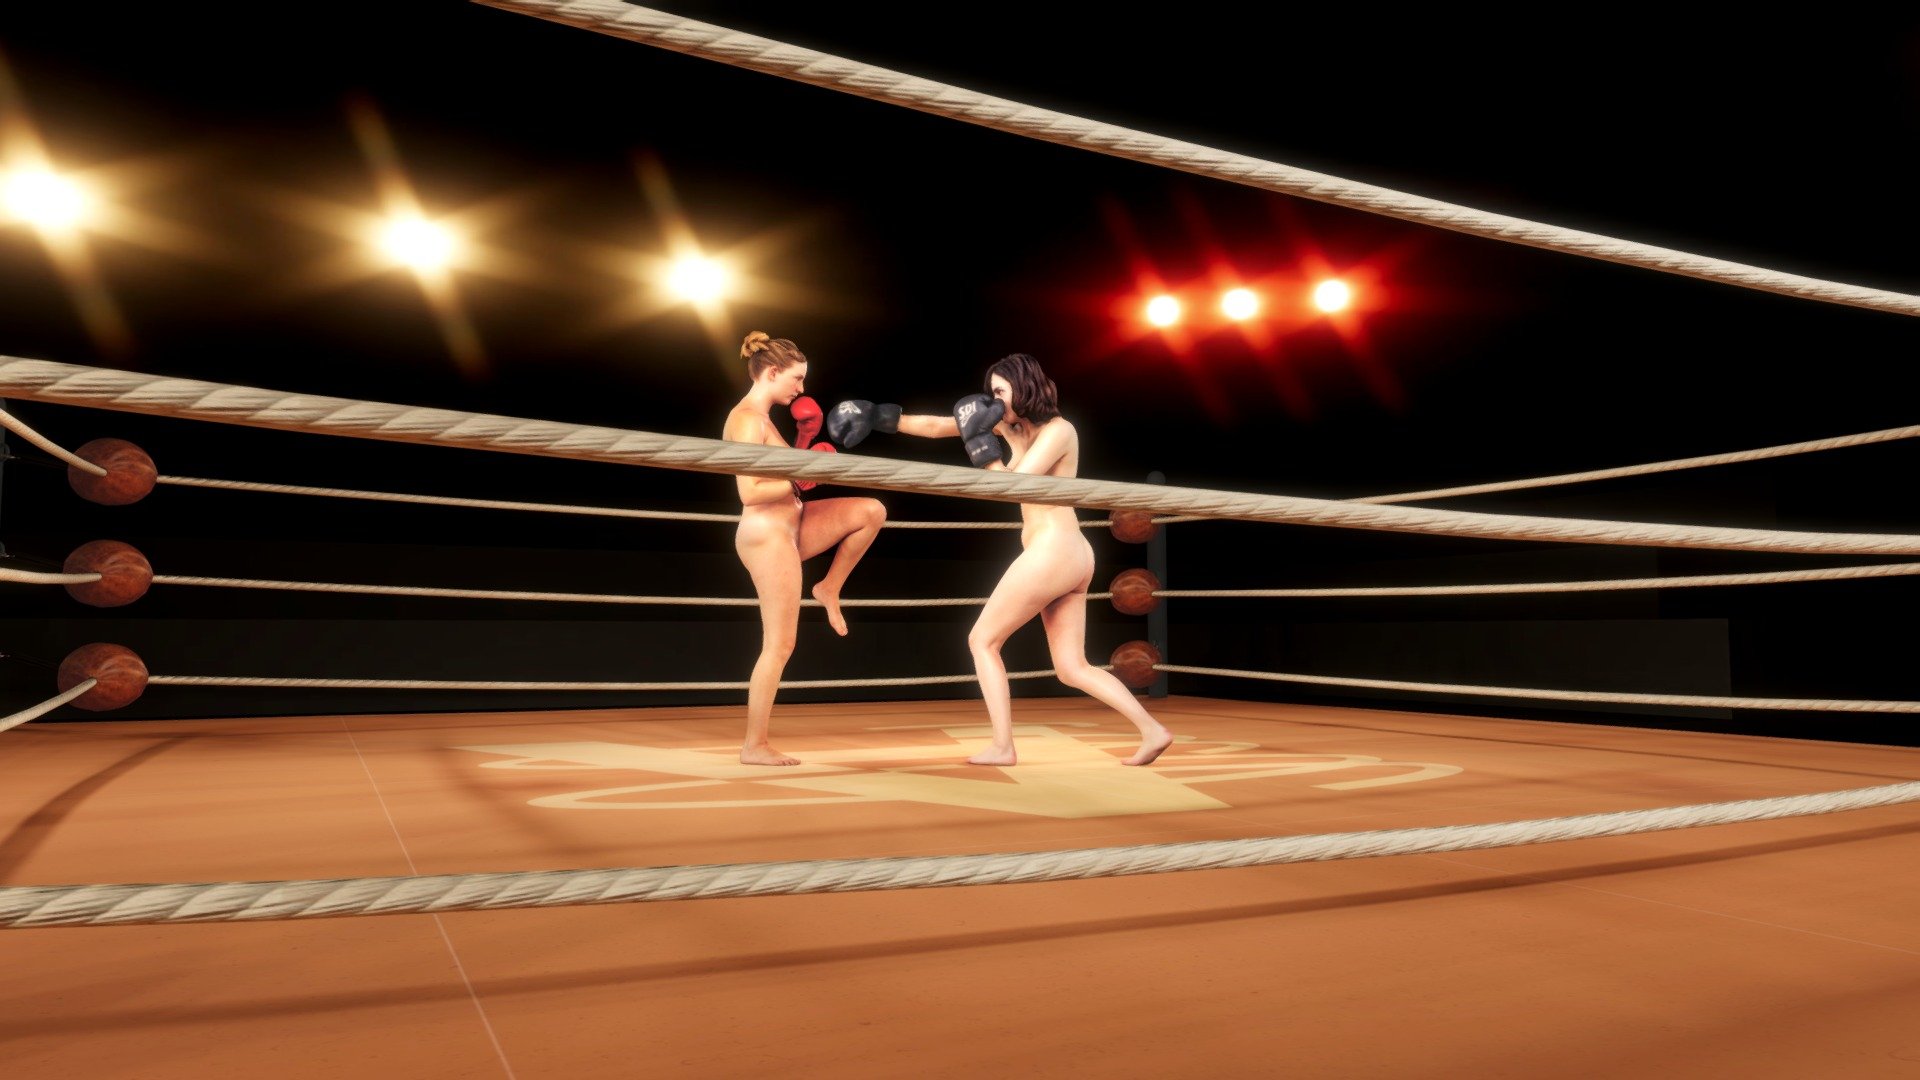 georgia model boxing naked on a ring with another nude model